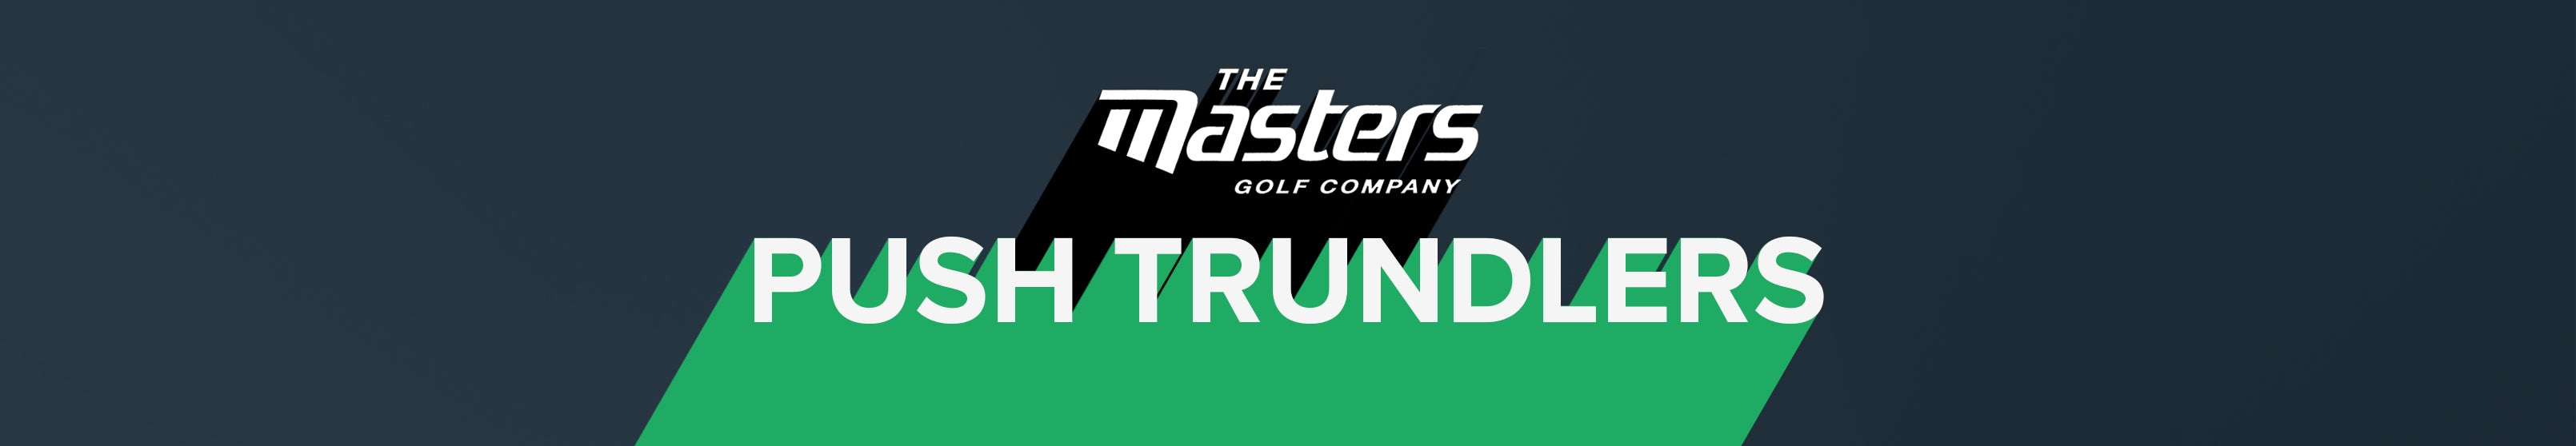 Masters Trundlers